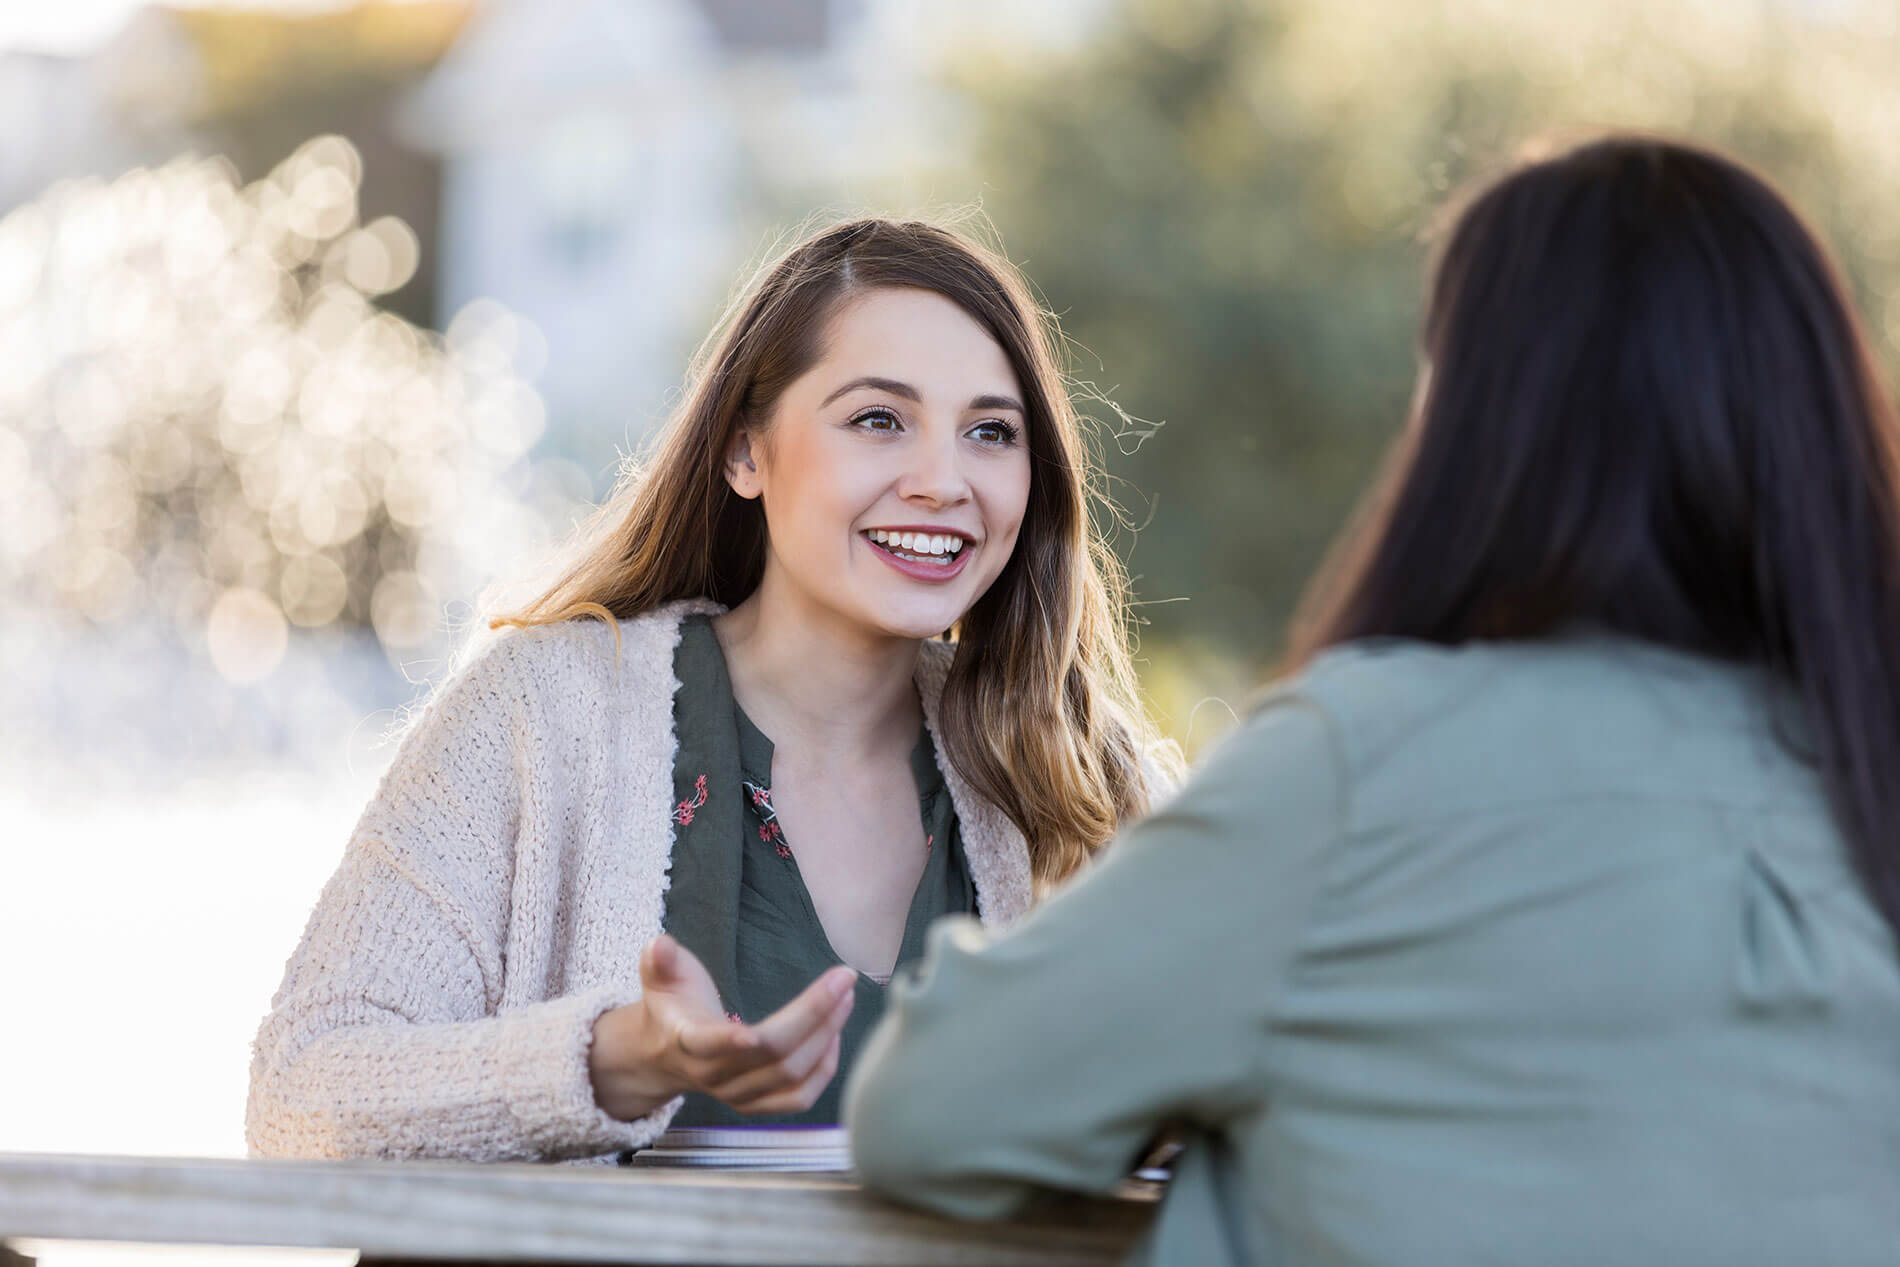 Two women smiling and talking outside on table